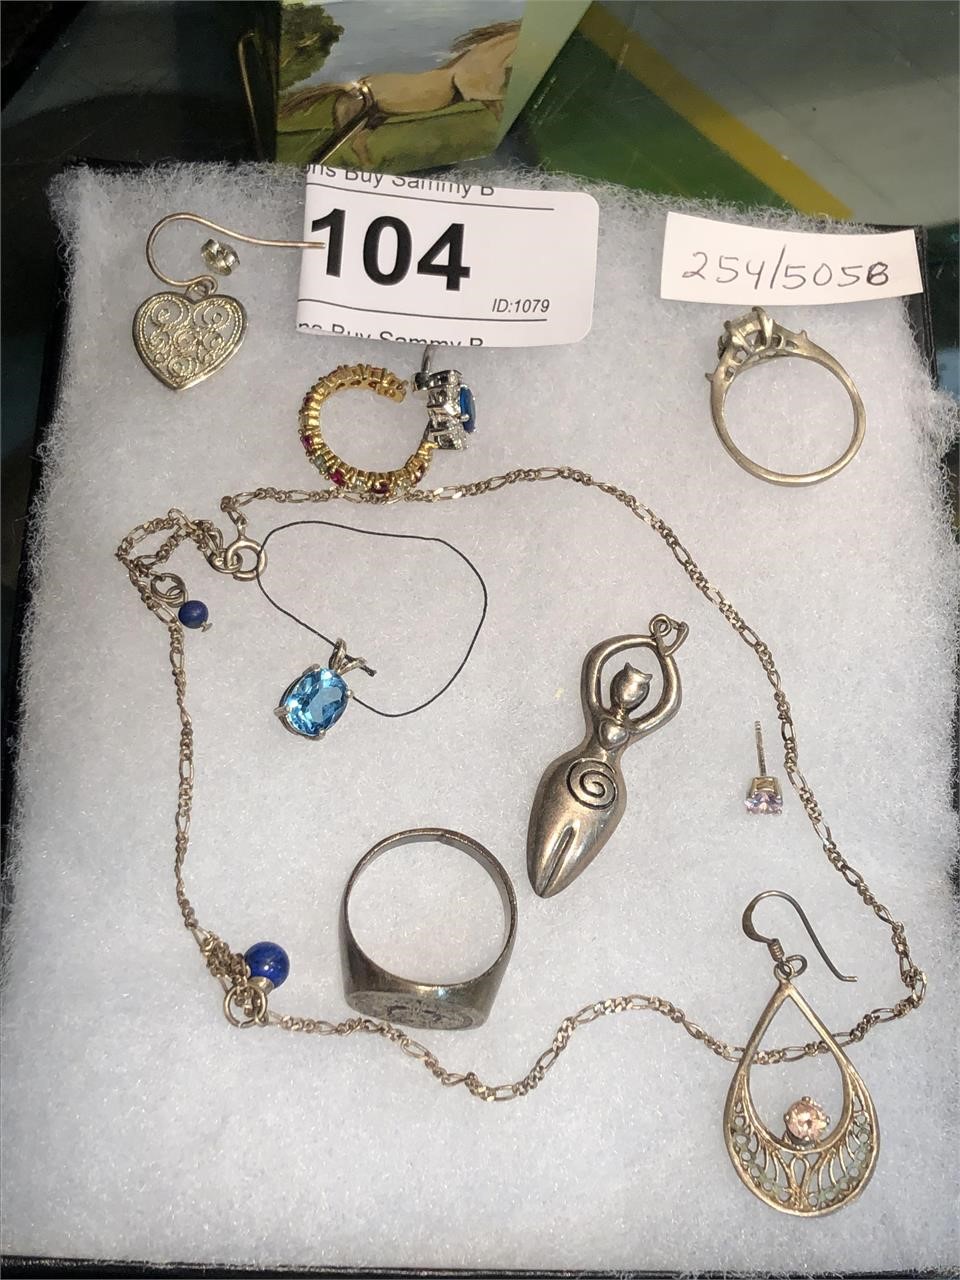 LIVE FRIDAY NIGHT AUCTION 10-25-19  5:30 PM